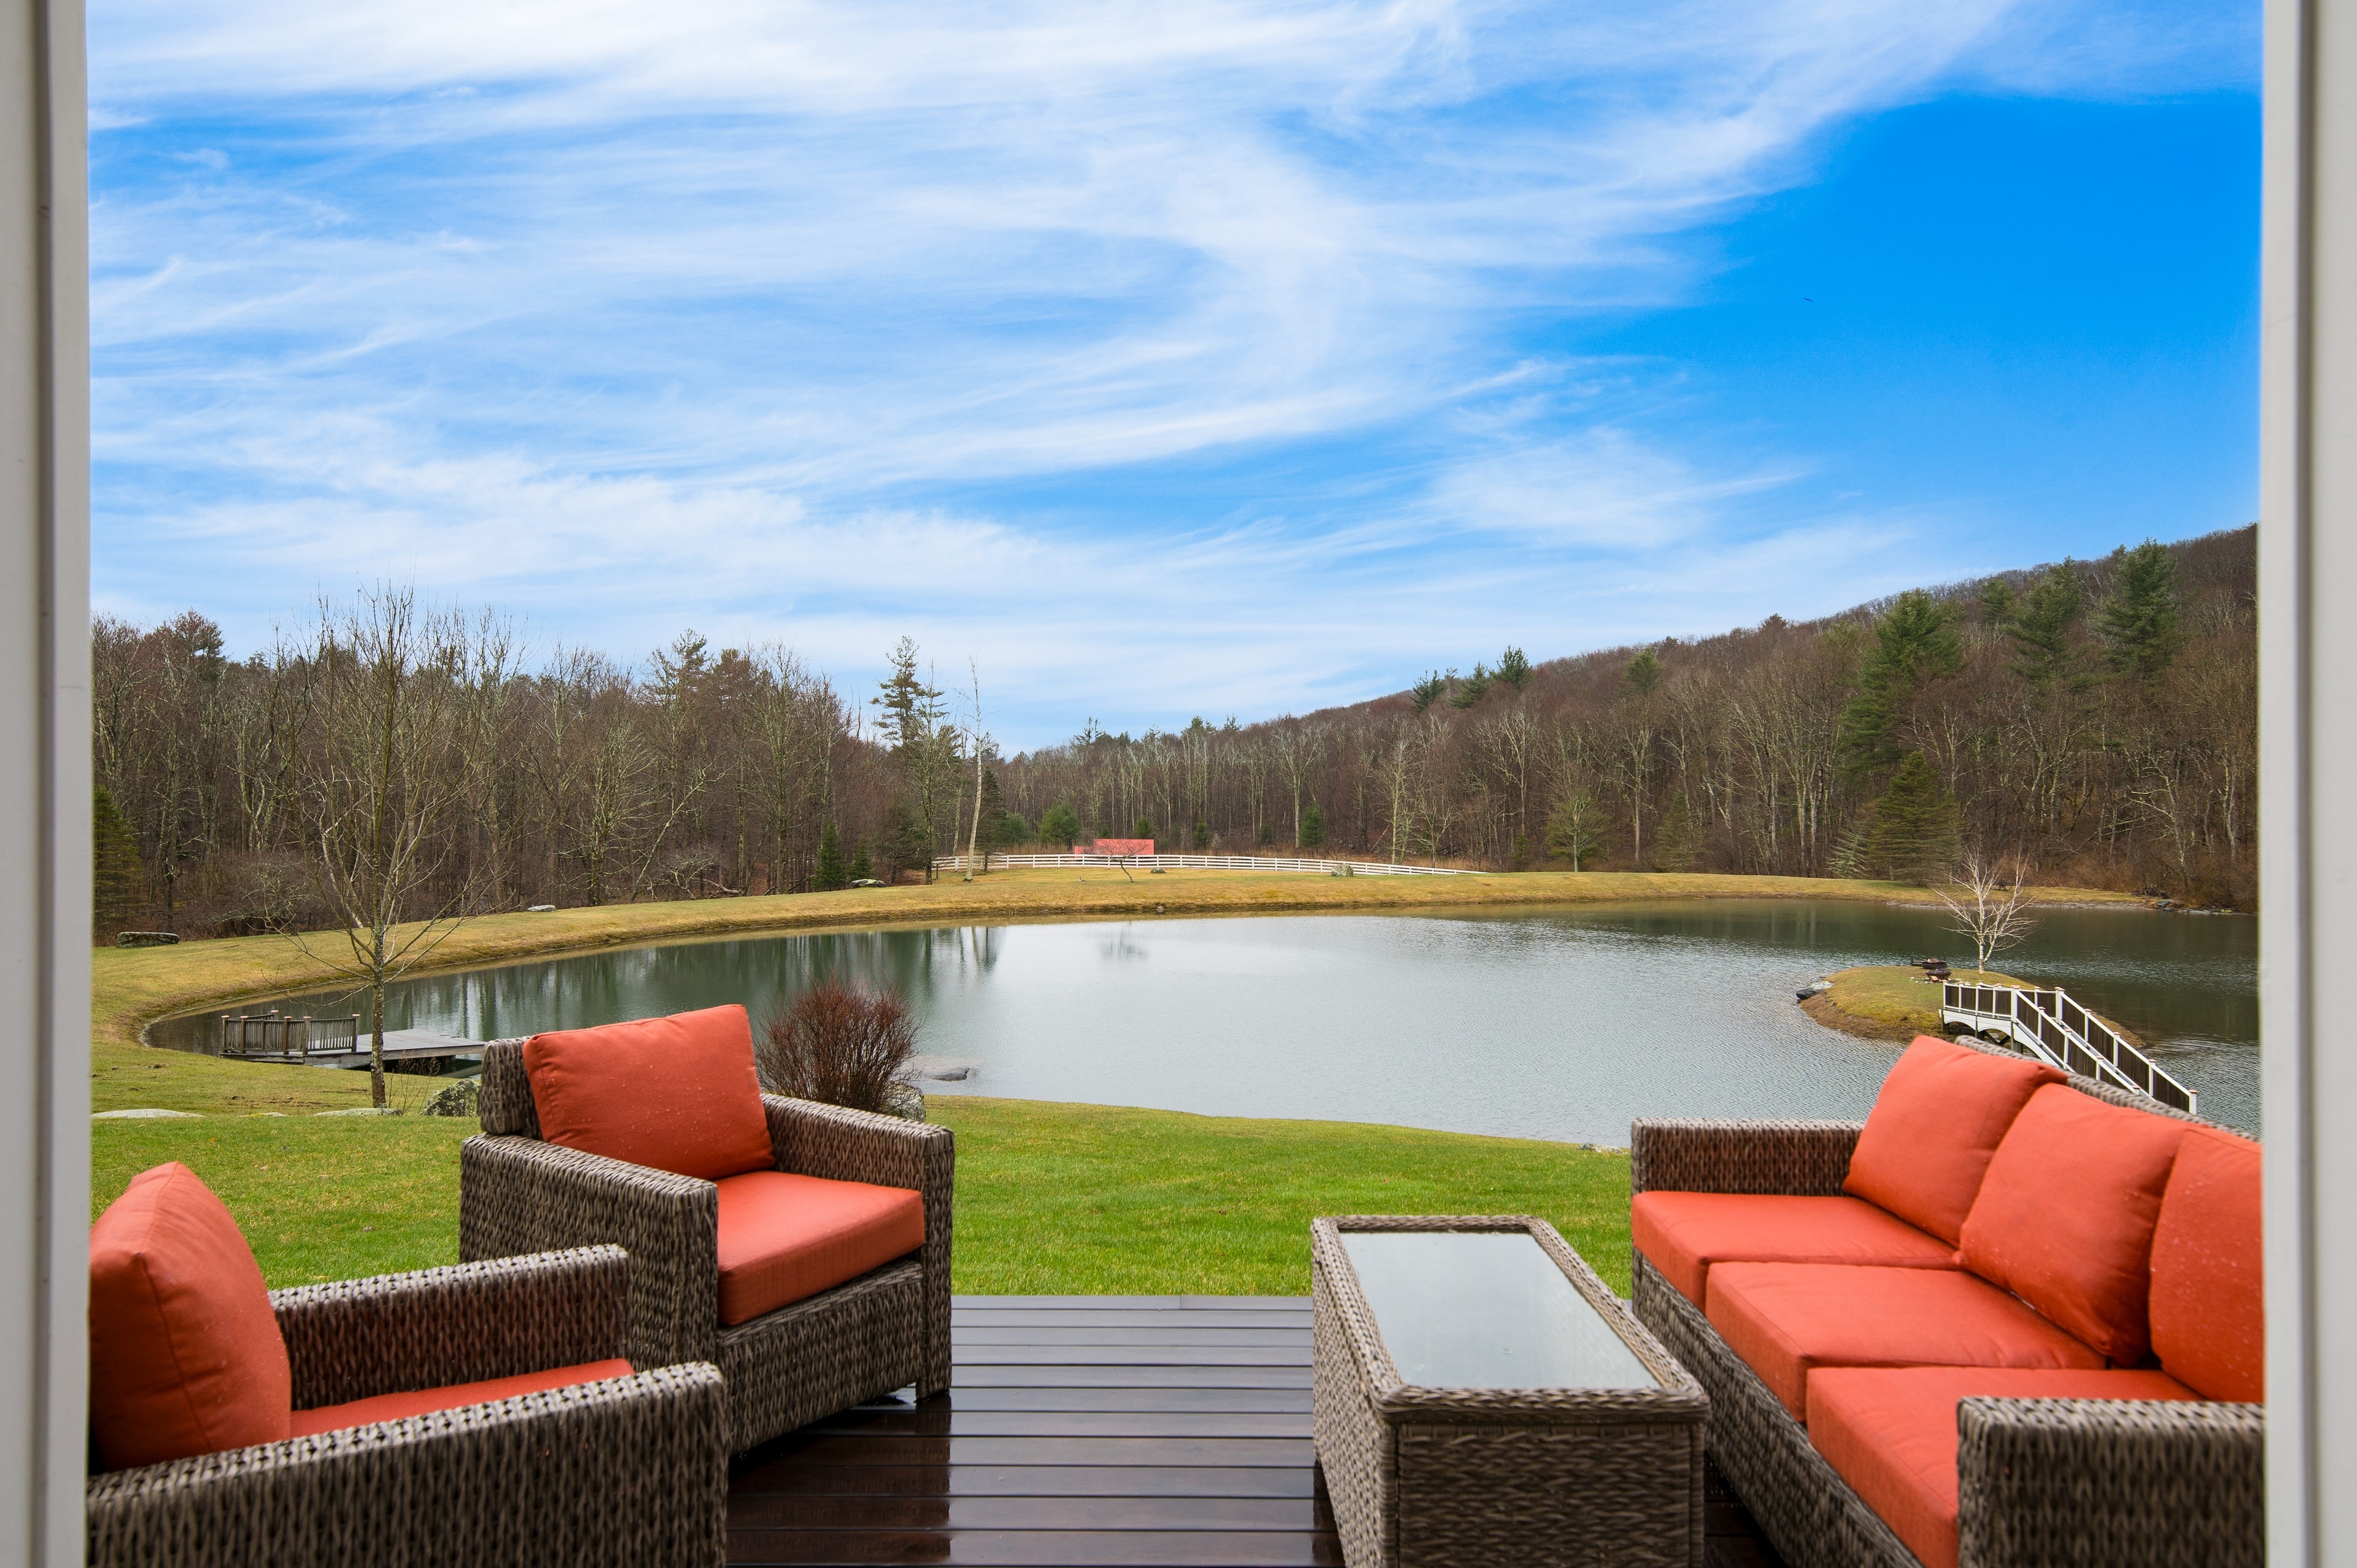 Lakeside serenity with outdoor living.